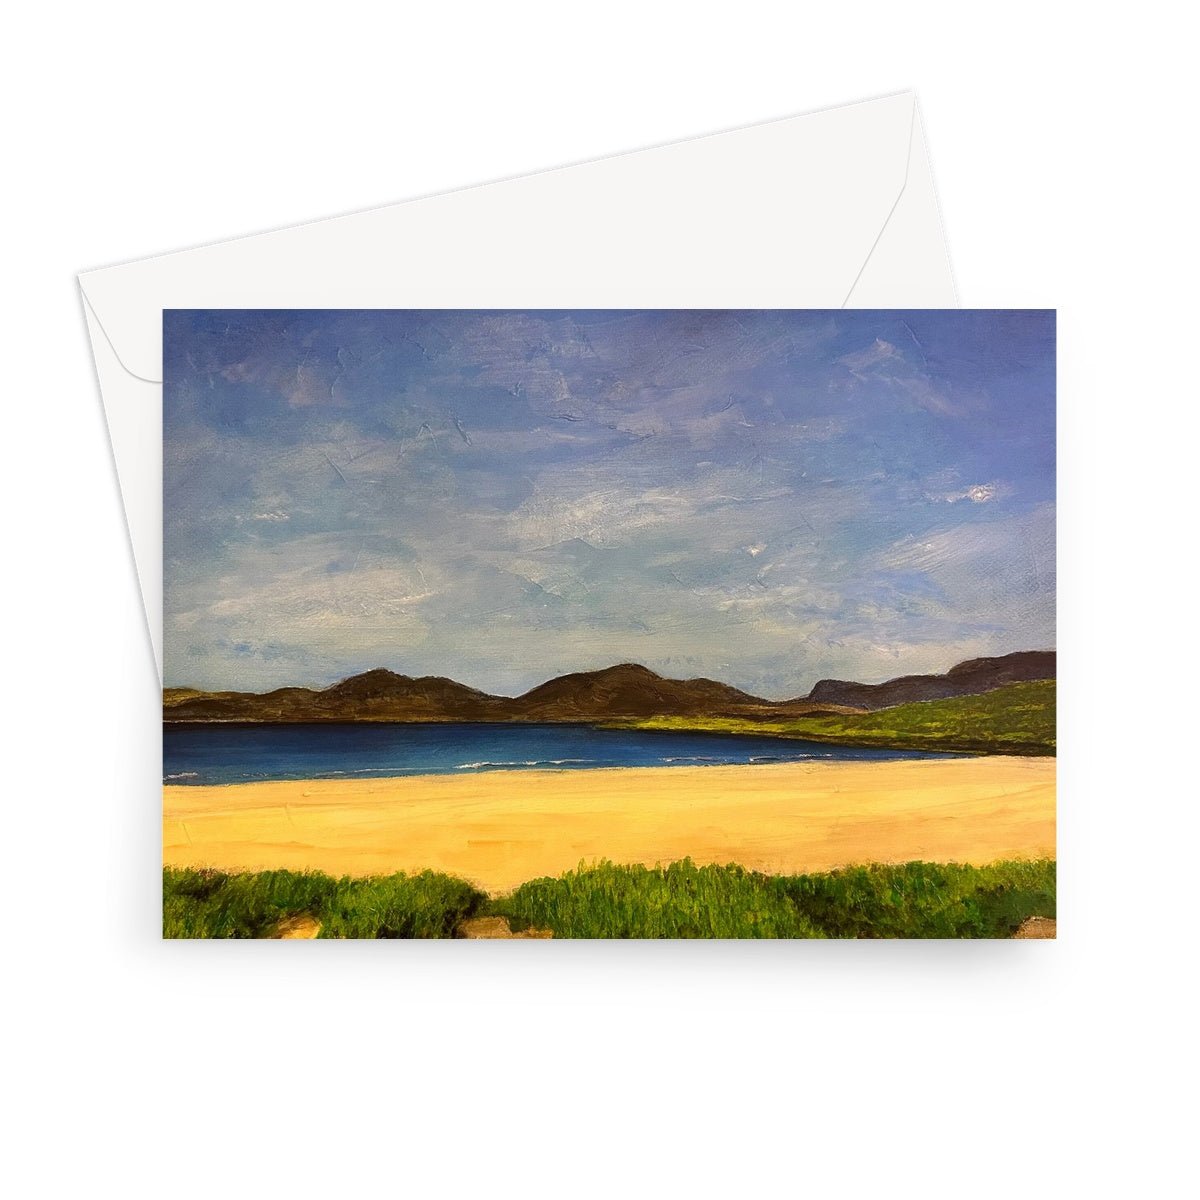 Luskentyre Beach Harris Art Gifts Greeting Card-Greetings Cards-Hebridean Islands Art Gallery-7"x5"-10 Cards-Paintings, Prints, Homeware, Art Gifts From Scotland By Scottish Artist Kevin Hunter